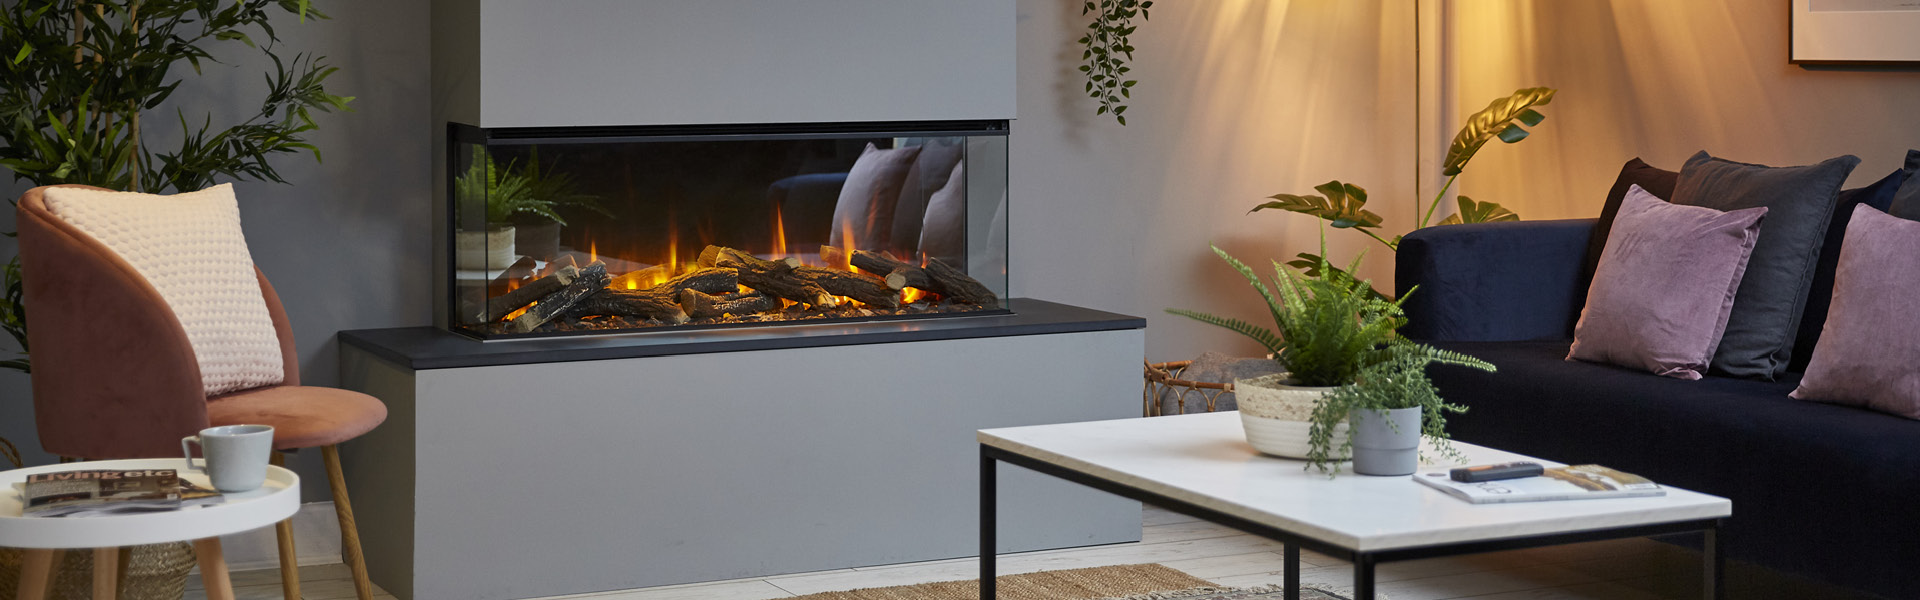 New Forest Electric Fire by Fireplace Finesse Bourne